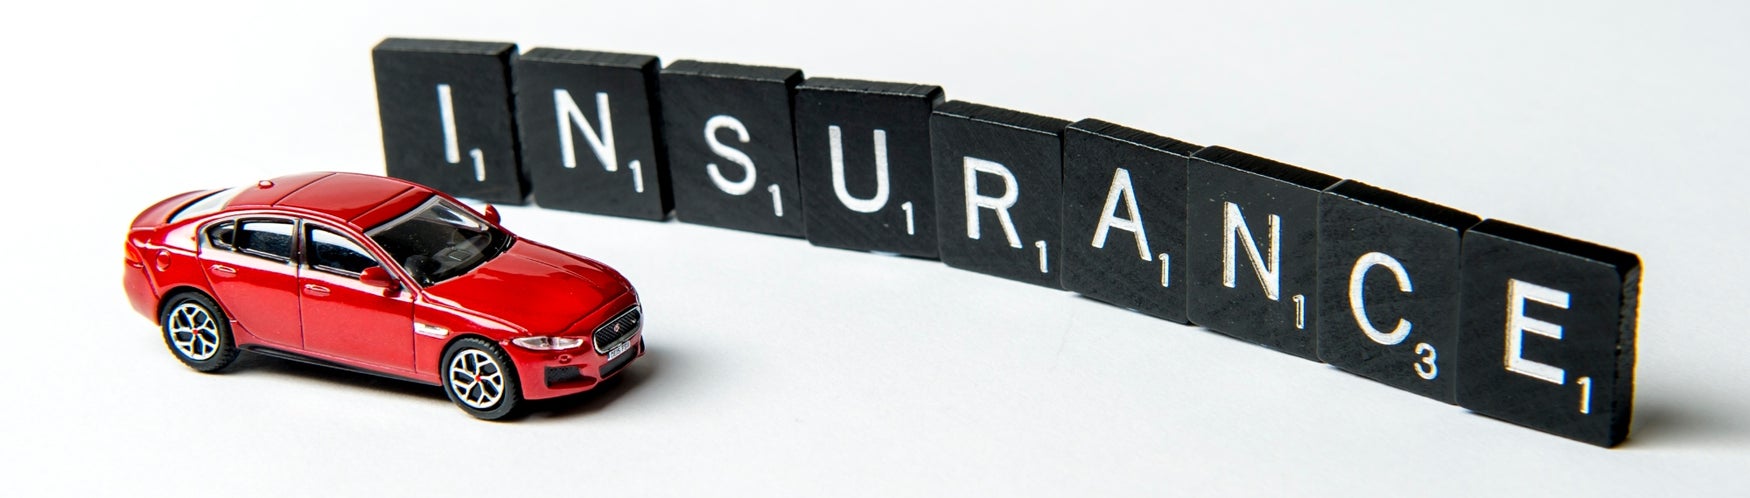 Toy car insurance